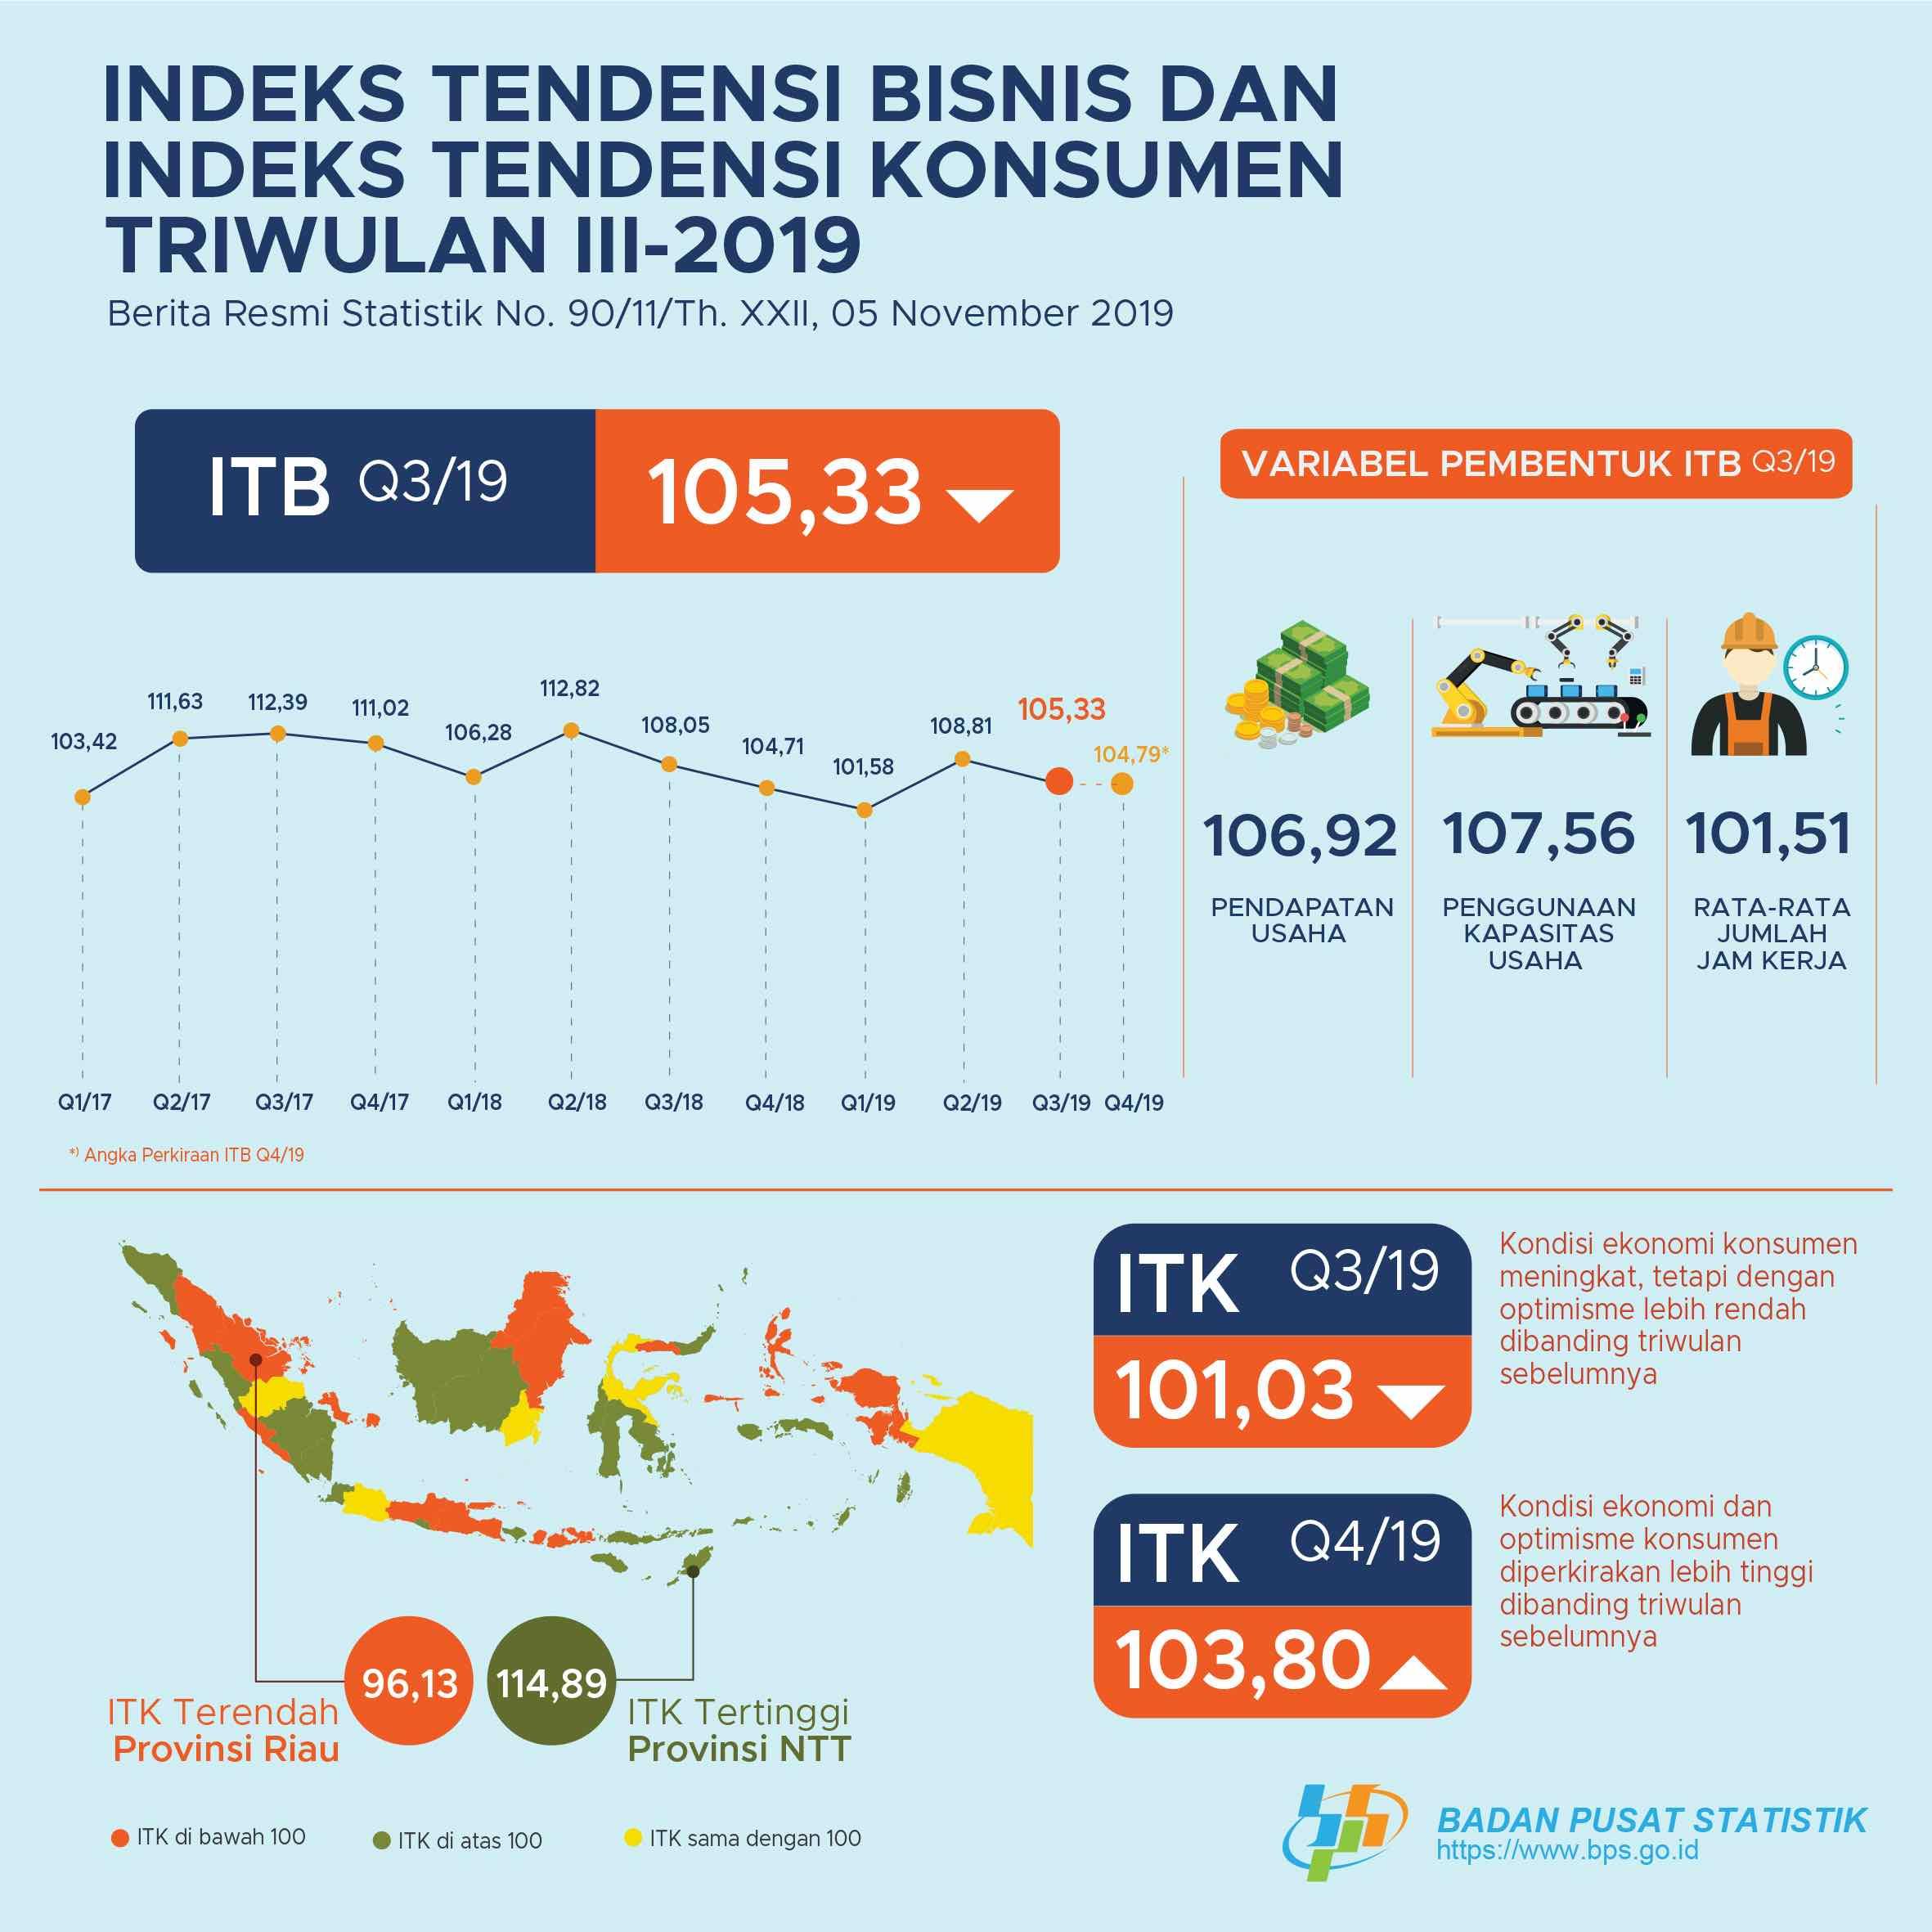 Business Conditions in Quarter III-2019 Increased (ITB 105.33)